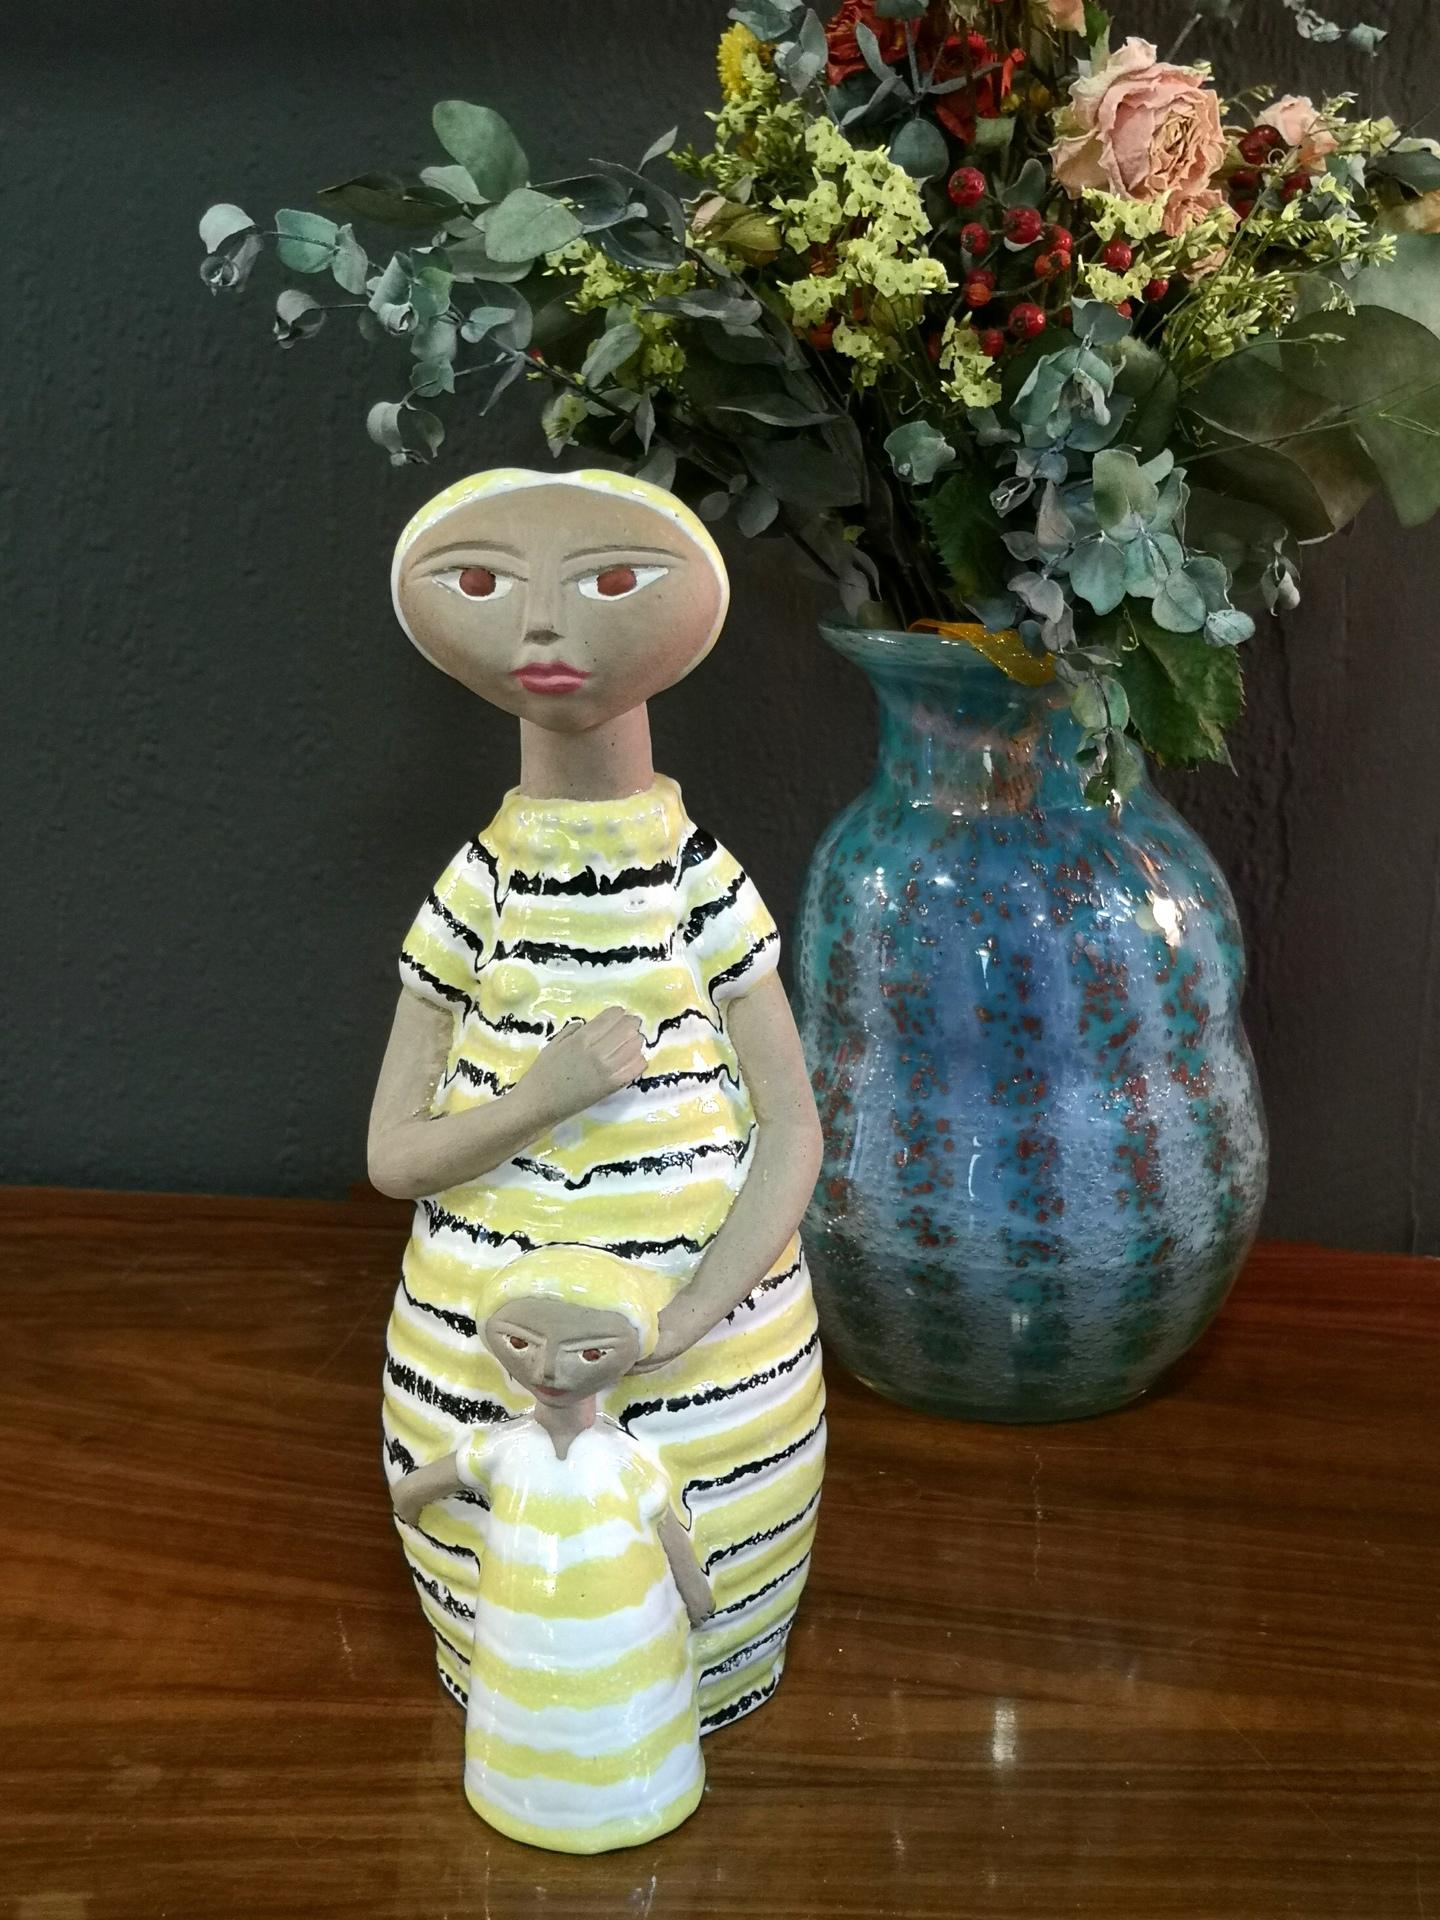 Lovely colorful hand-made ceramic sculpture of a mother with her daughter, from the 1970s. It's markes Slakta, and is in great condition.